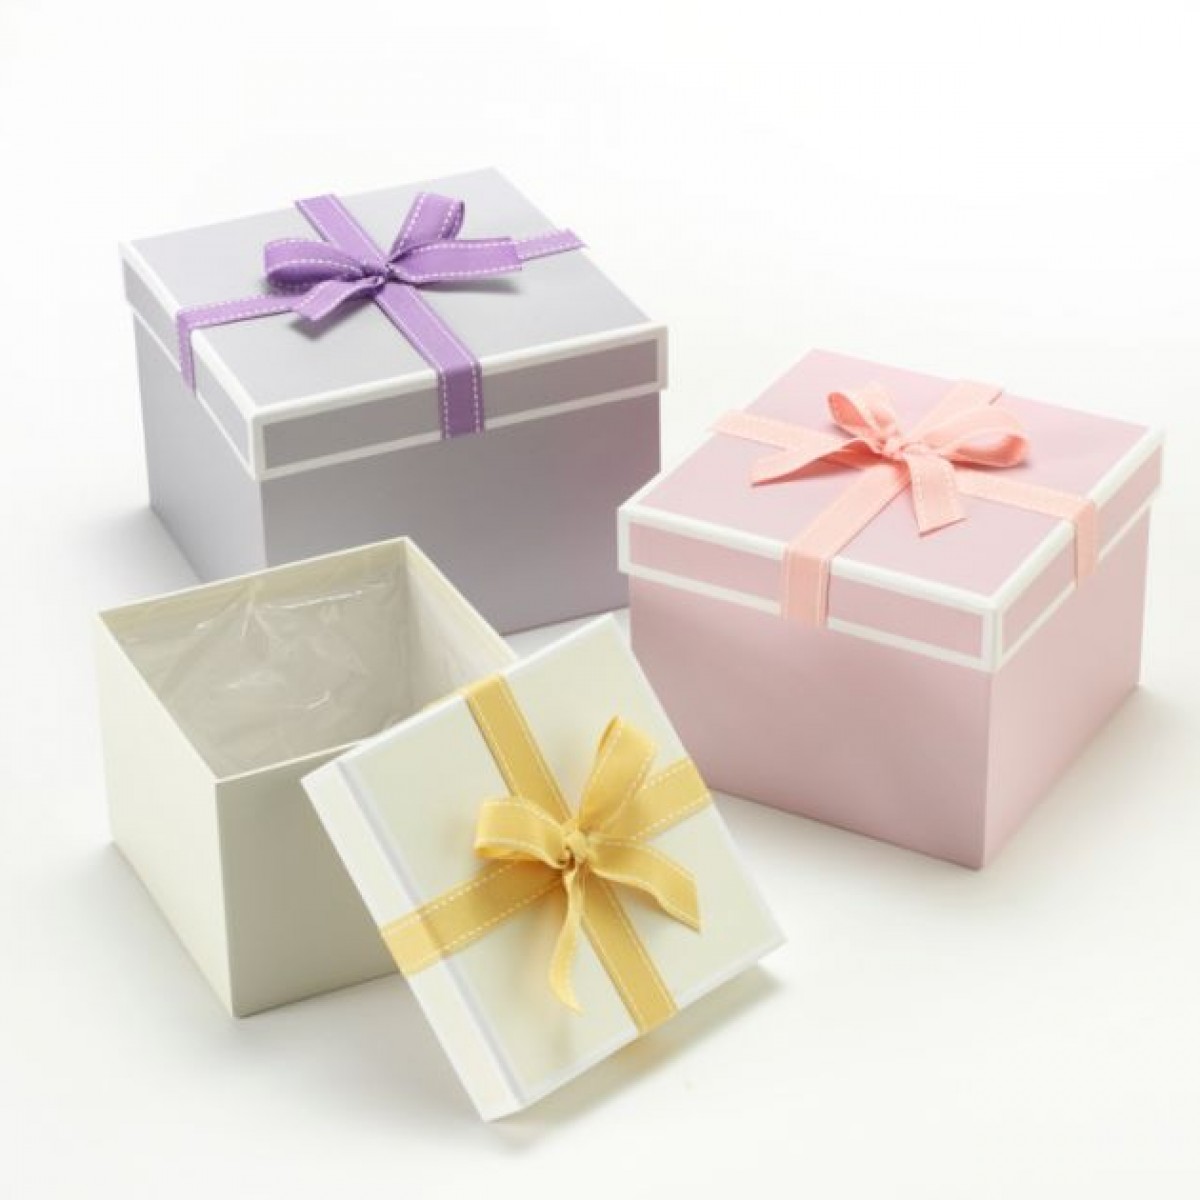 5025 Grey/Pink/Cream (12 Sets) Square Paper Gift Box With Bow Lined